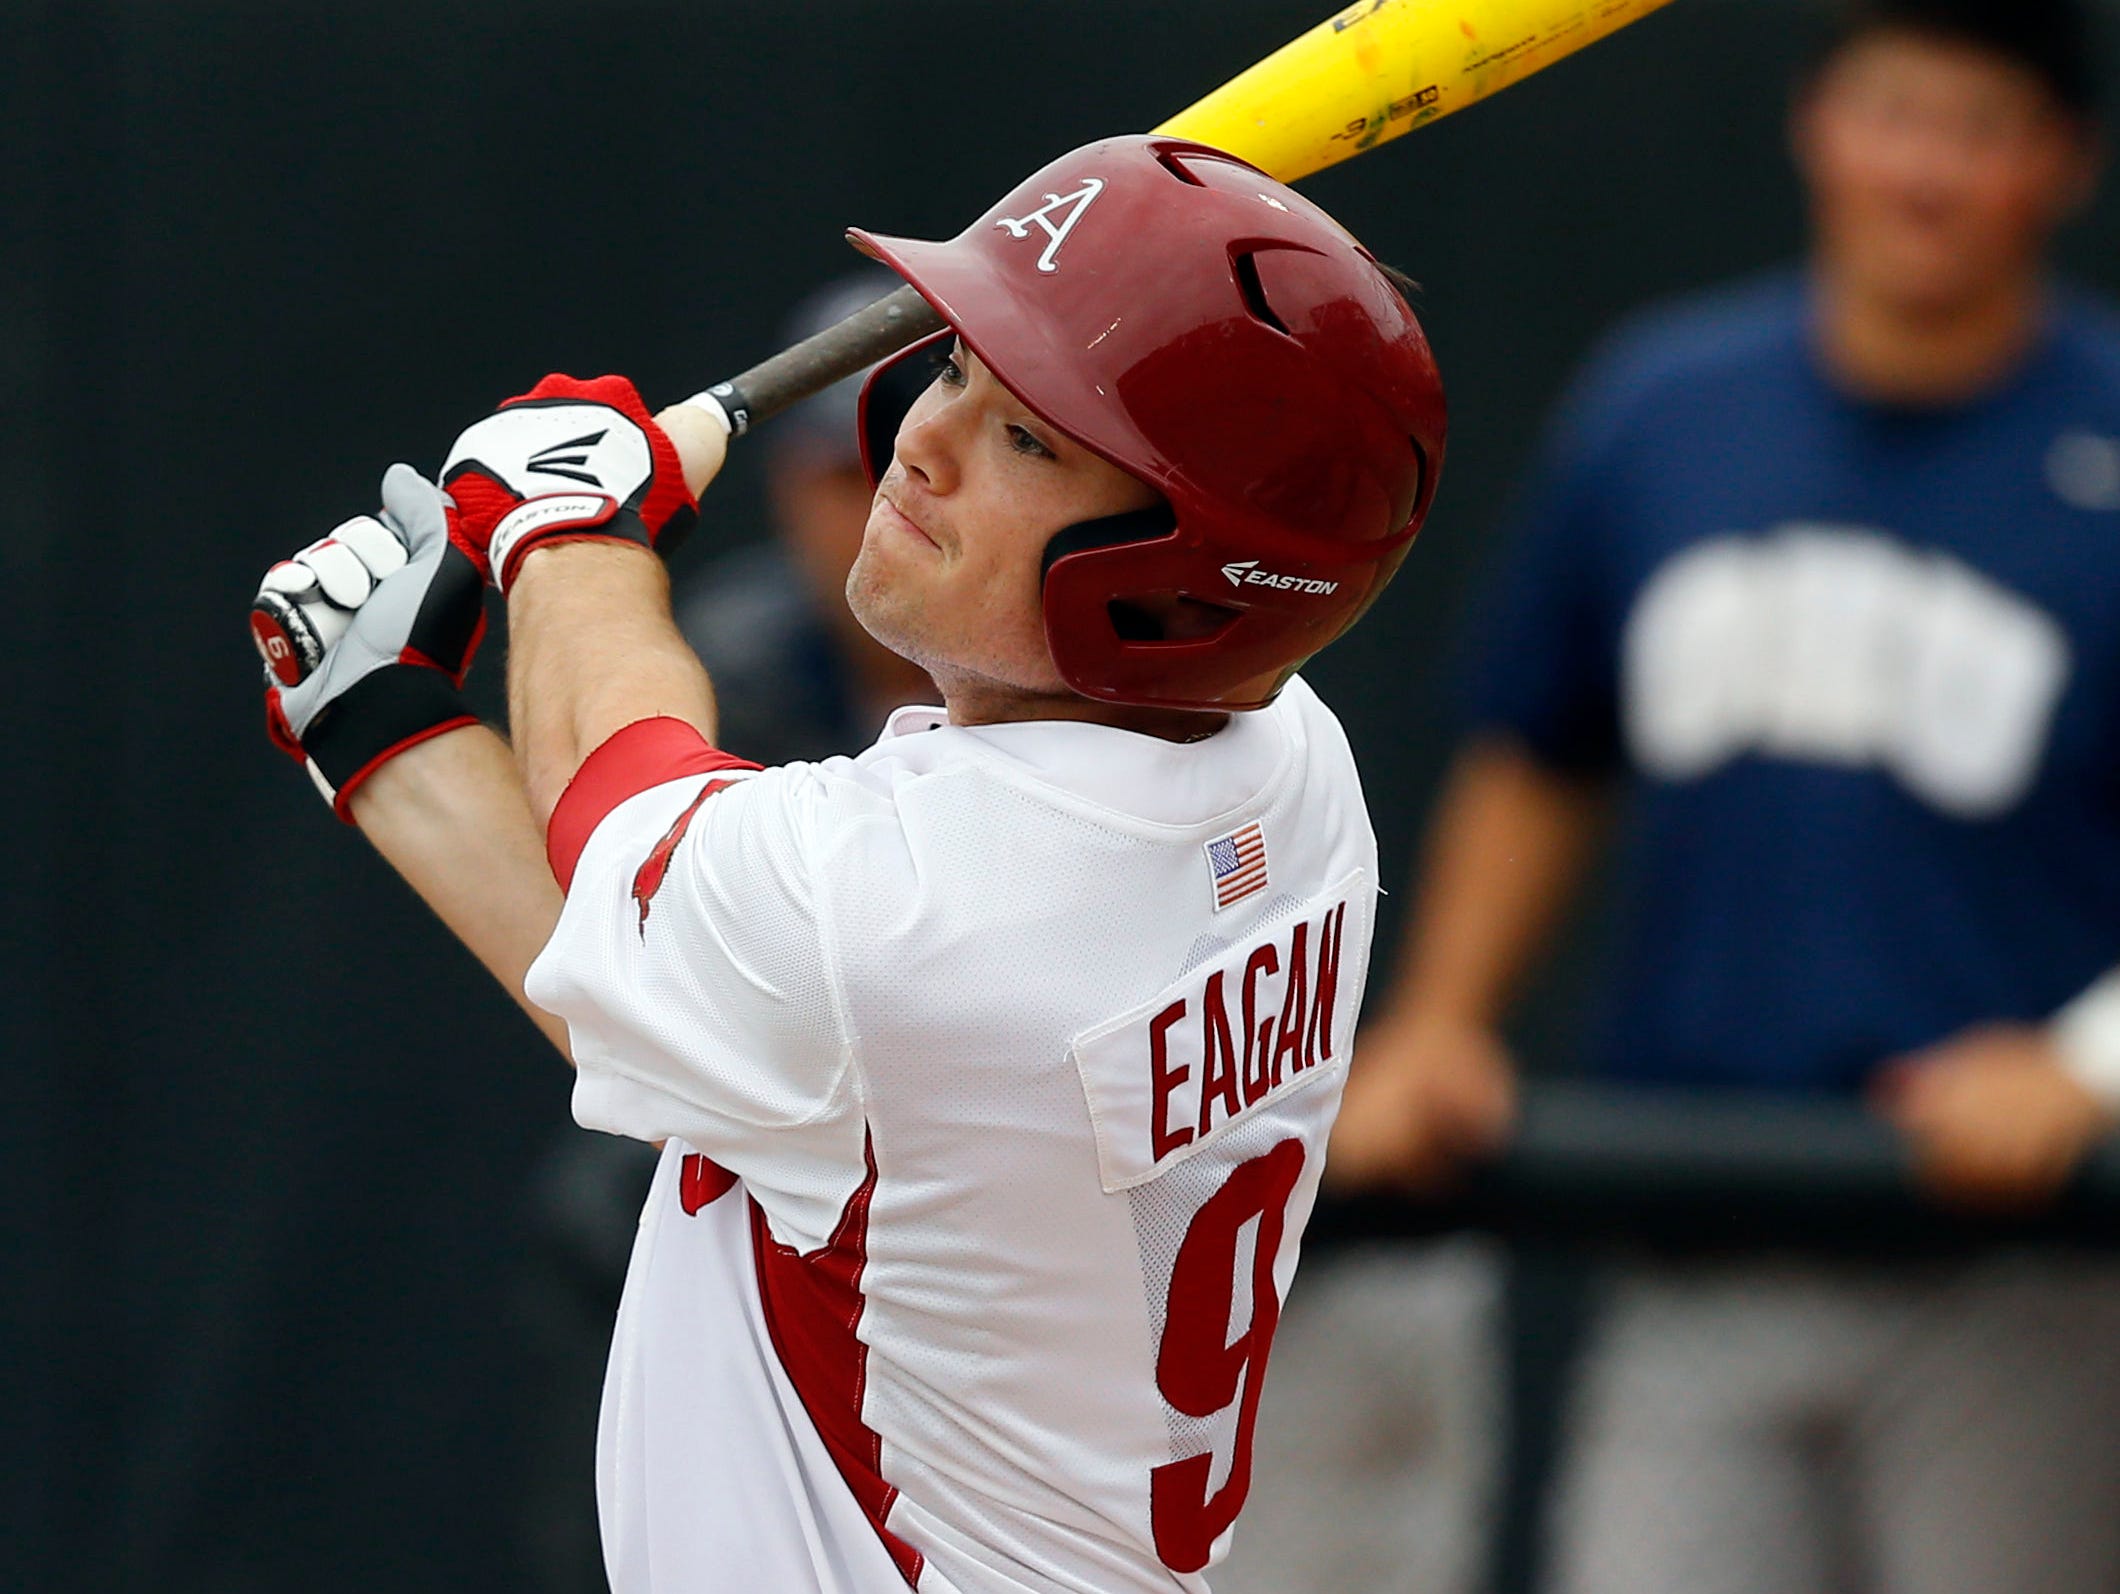 Clark Eagan’s two-run triple in the eighth inning proved the game-winning hit as Arkansas outlasted Oral Roberts.